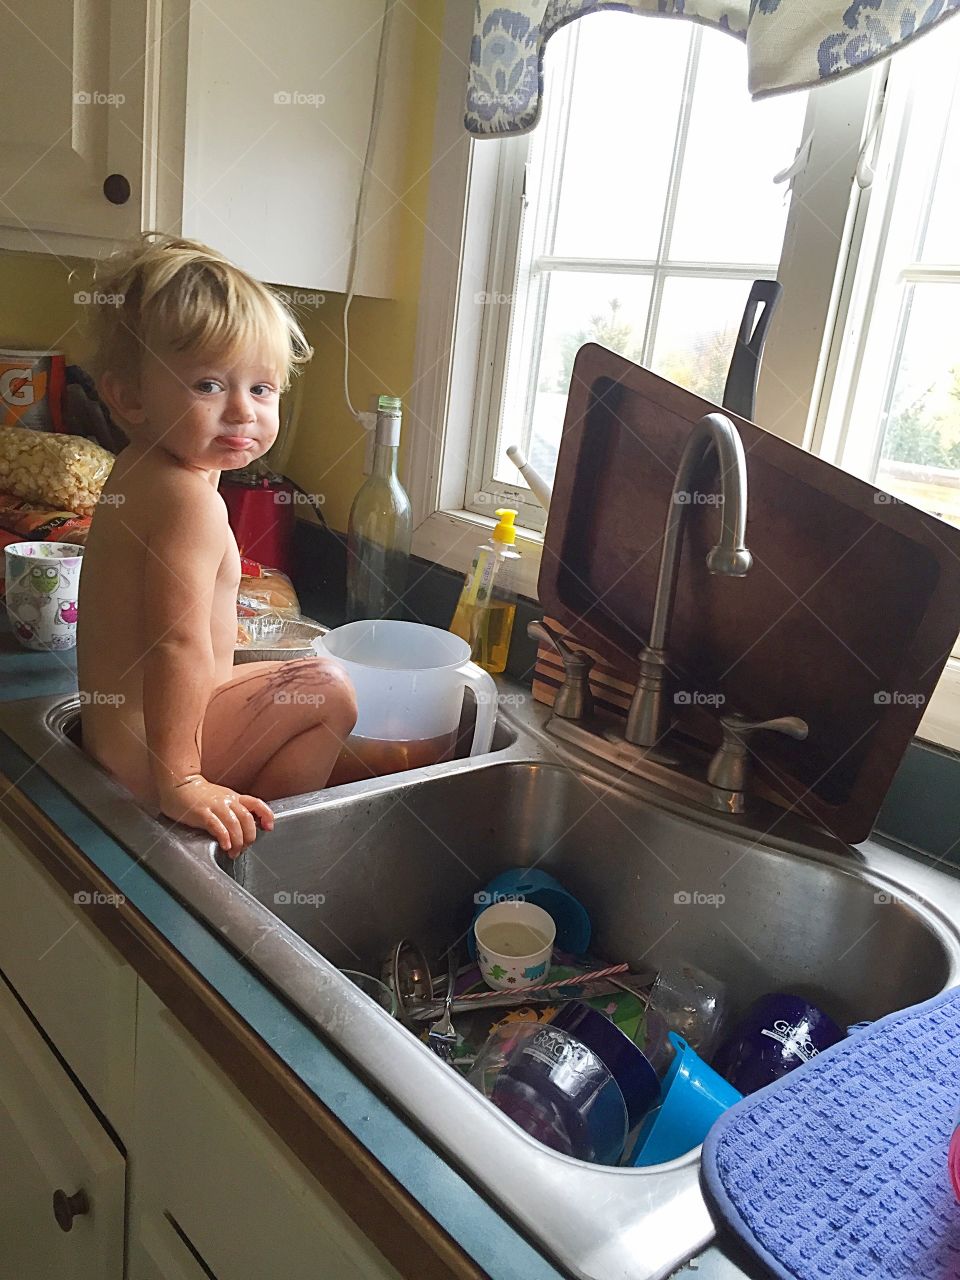 Naked little toddler that has climbed into the kitchen sink. 